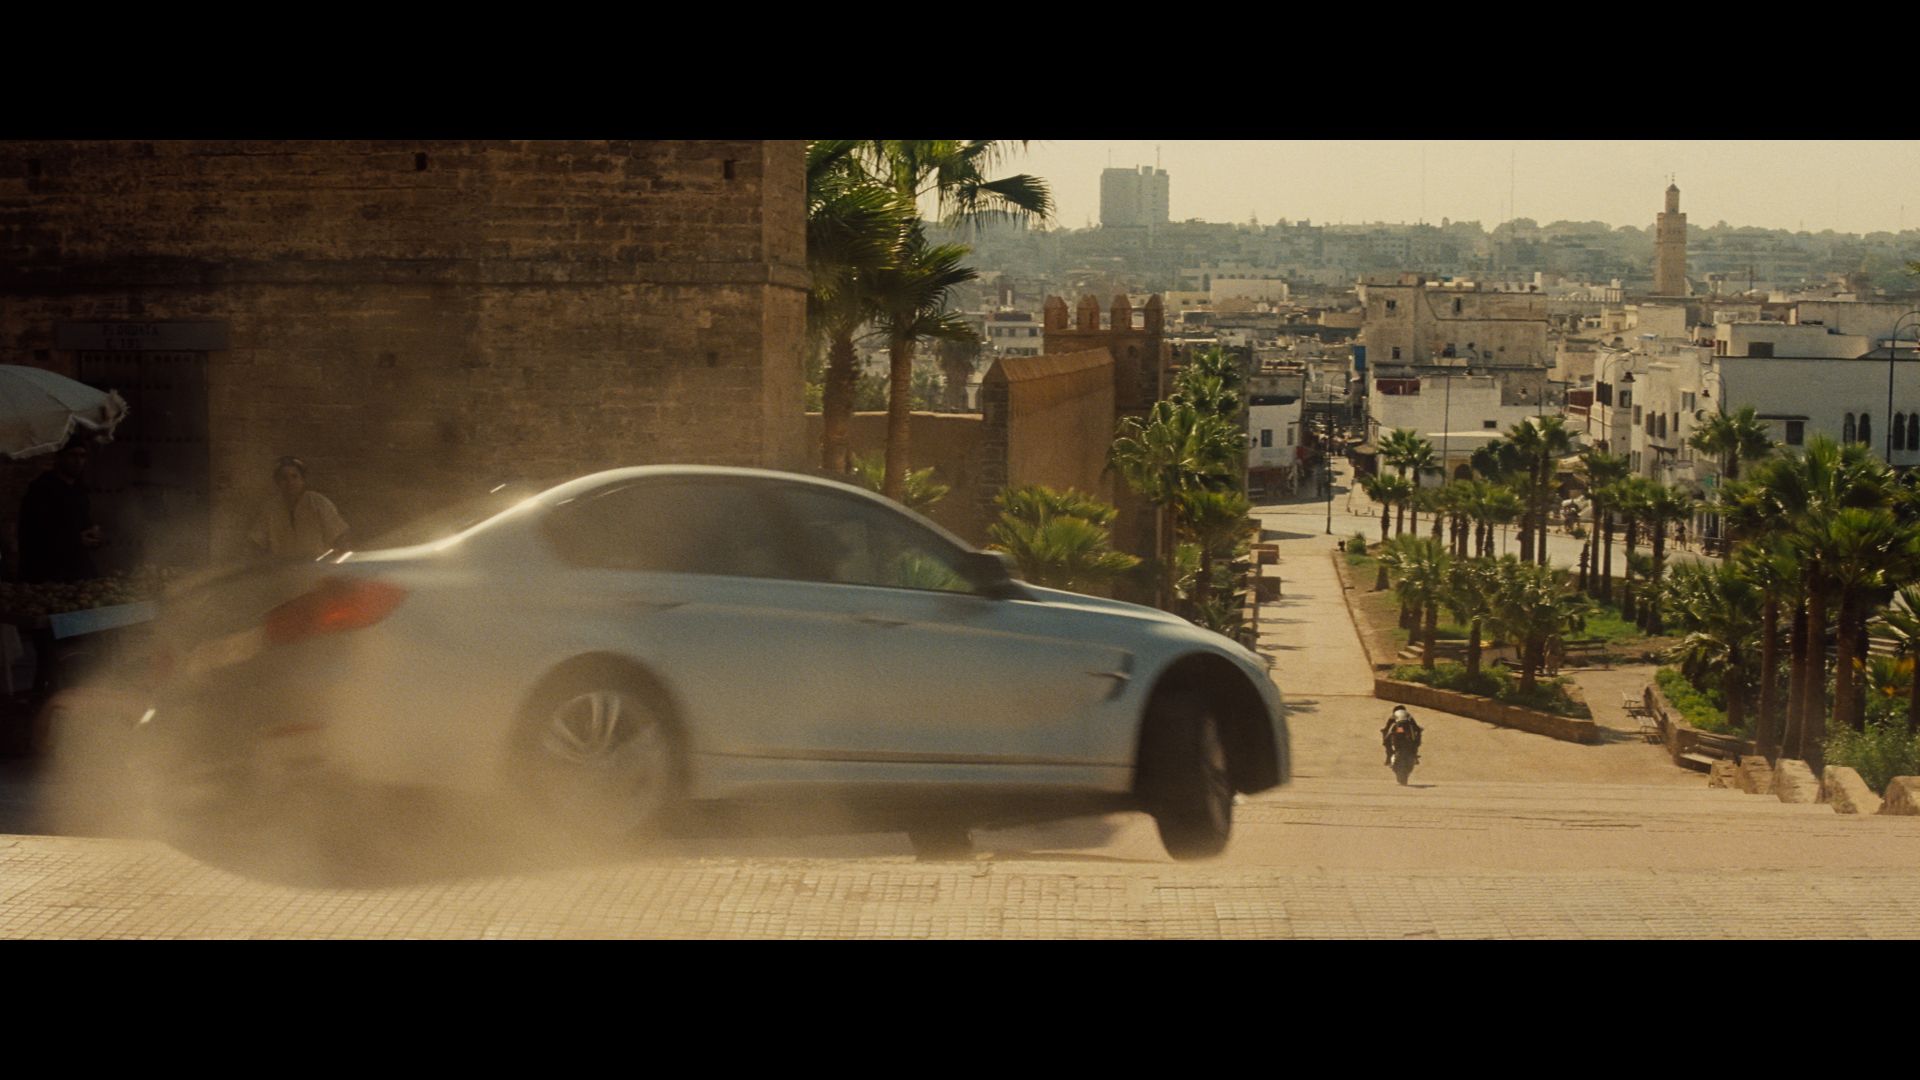 Geht auch mal quer: Der BMW M3 F80 in Mission Impossible 5 Rogue Nation.